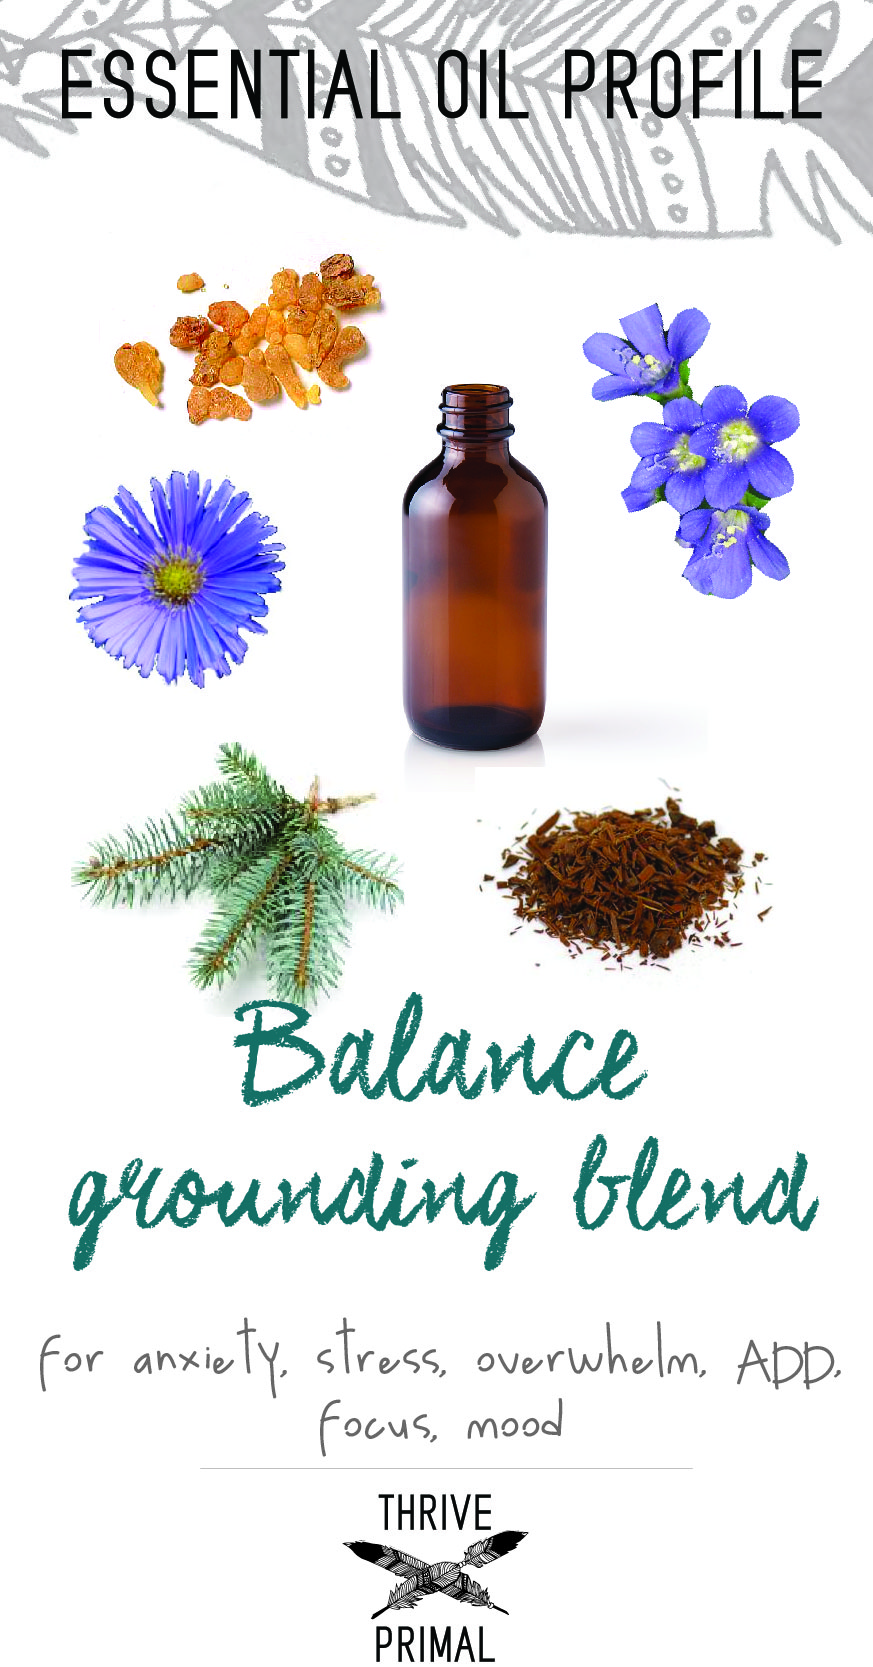 Thrive Primal - doTERRA balance essential oil benefits and how to use